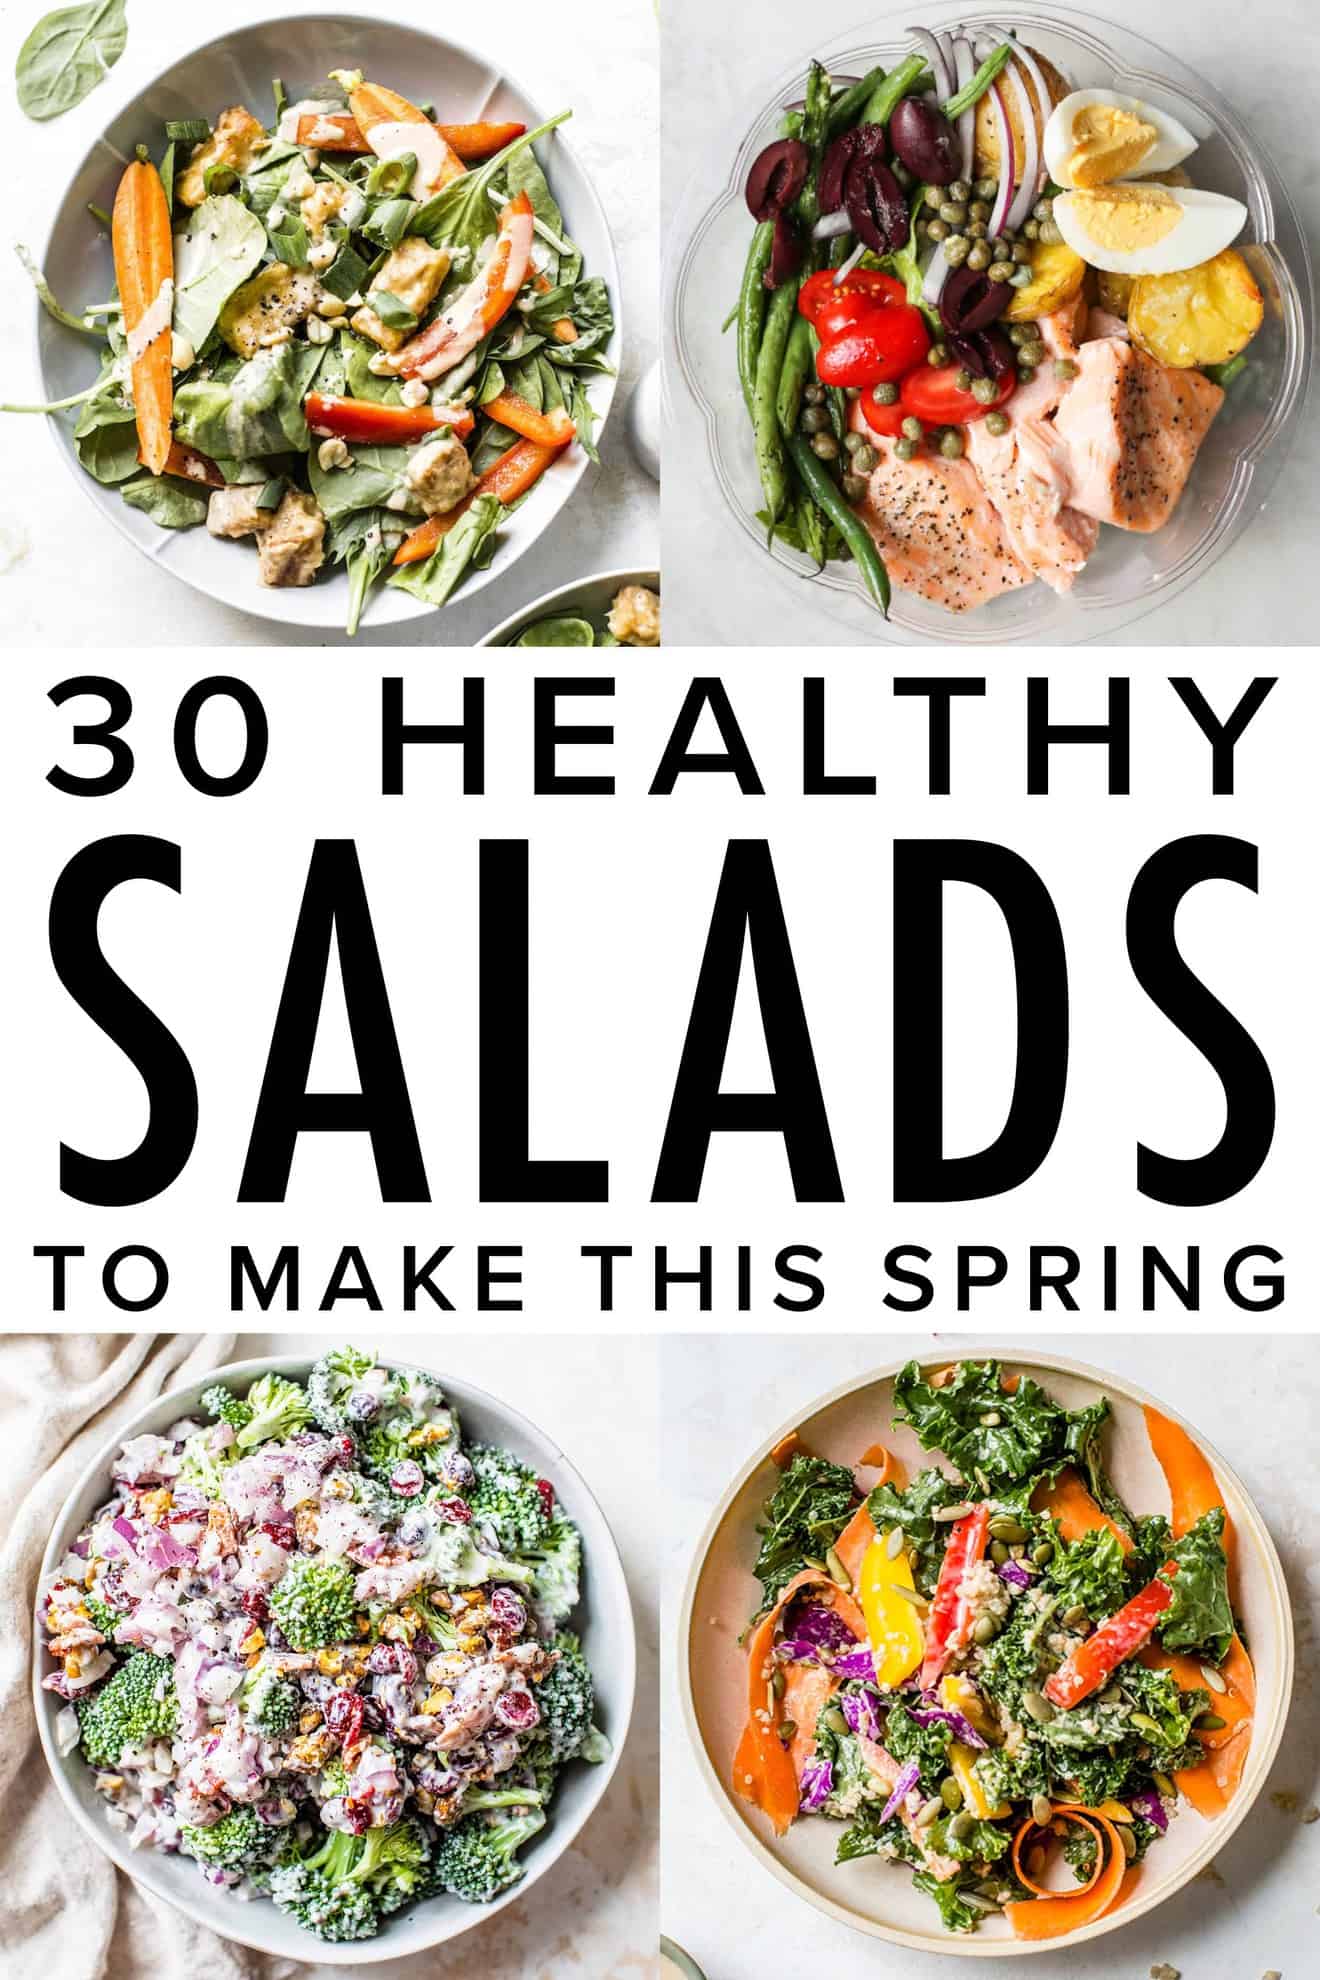 Sometimes I fall into salad ruts and need some new salad recipes to peak my interest! Get some salad inspo with this recipe roundup for 30 healthy salads! thetoastedpinenut.com #thetoastedpinenut #salad #salads #saladrecipe #roundup #reciperoundup